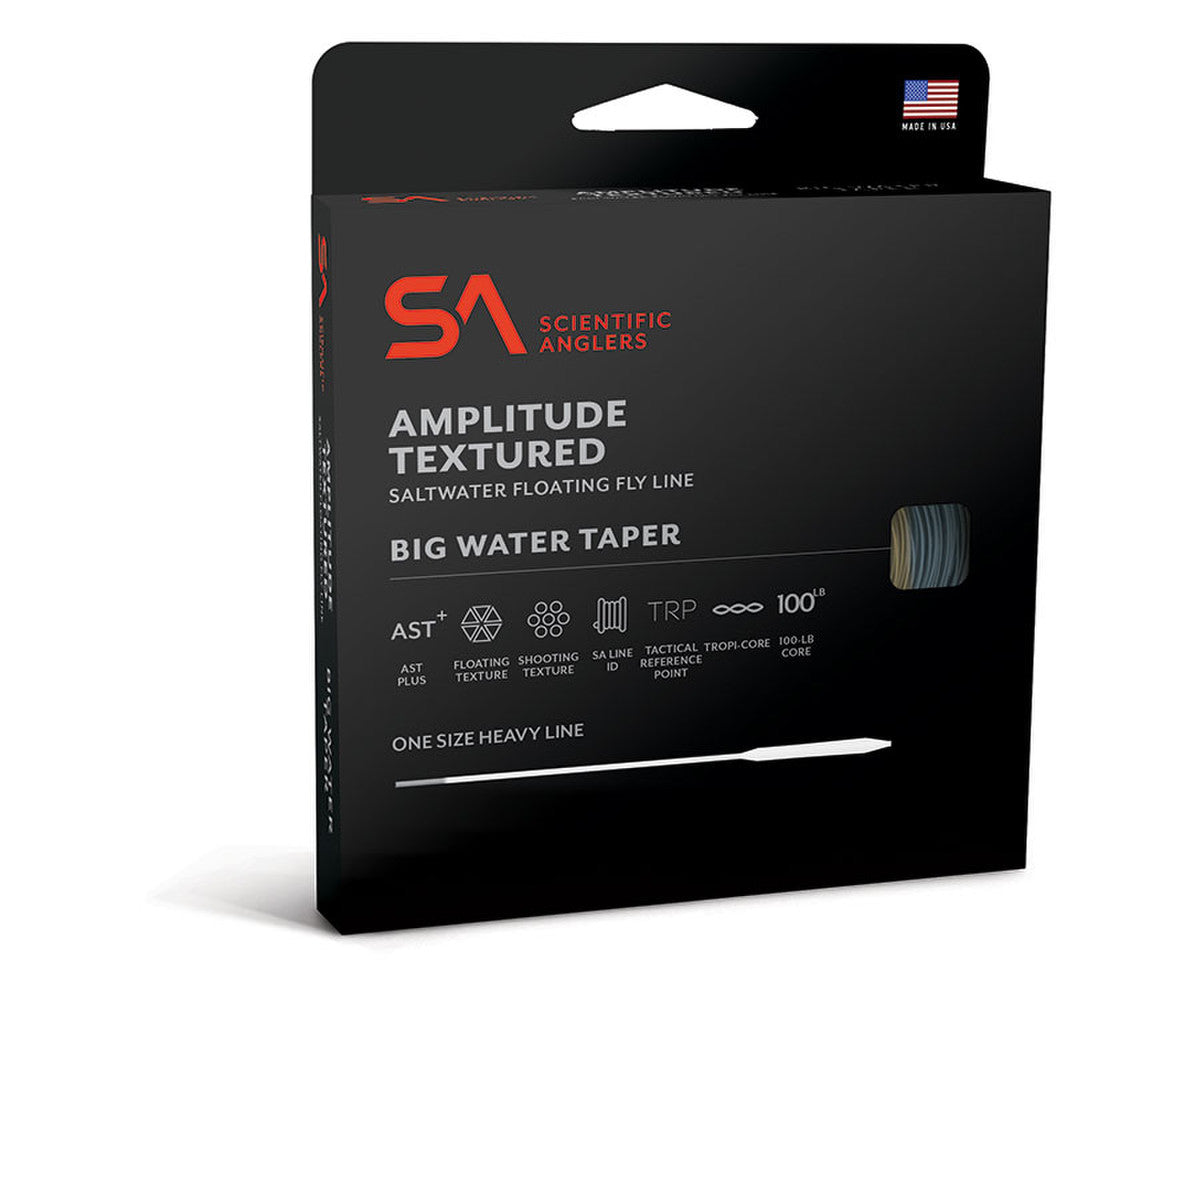 Scientific Anglers Amplitude BWT Big Water Taper Fly Line - NEW!